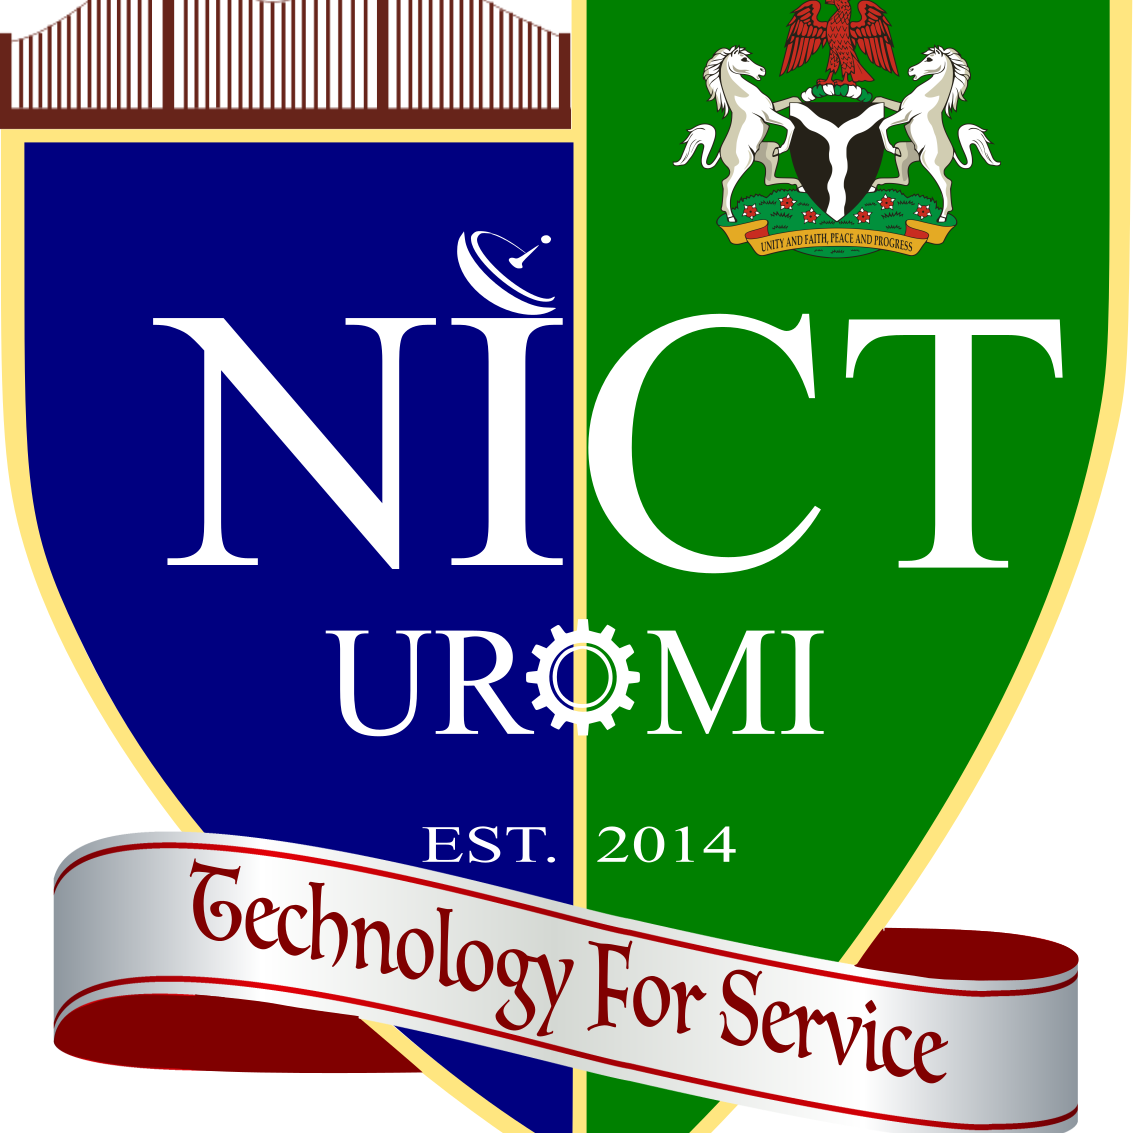 List Of Courses Offered By National Institute Of Construction Technology Uromi